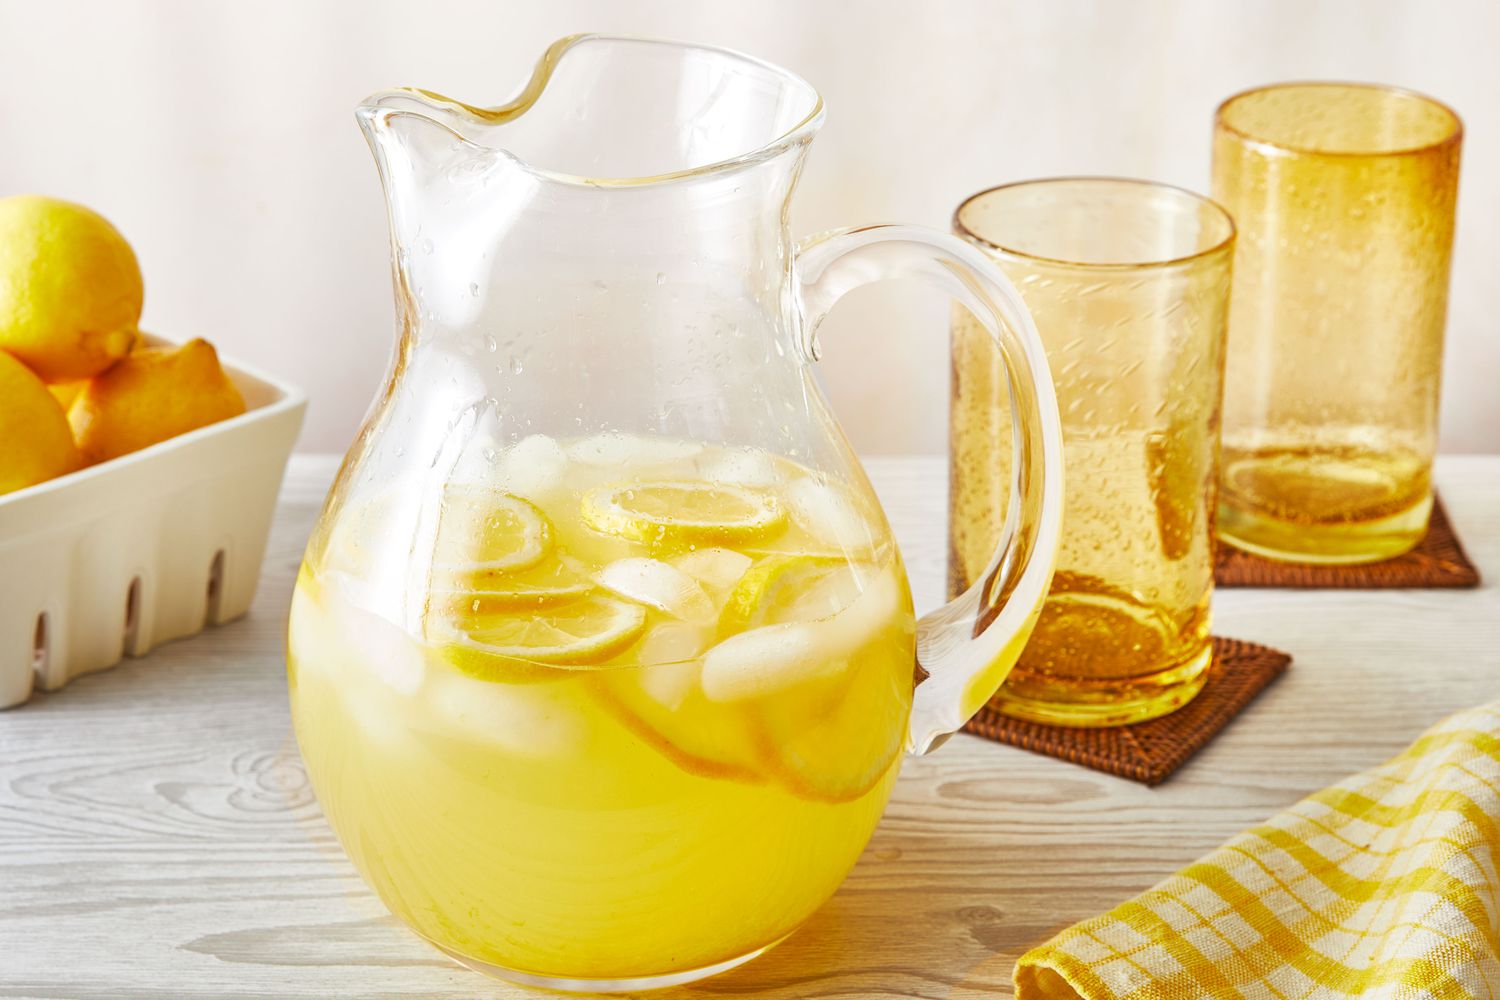 What Alcohol Goes with Lemonade